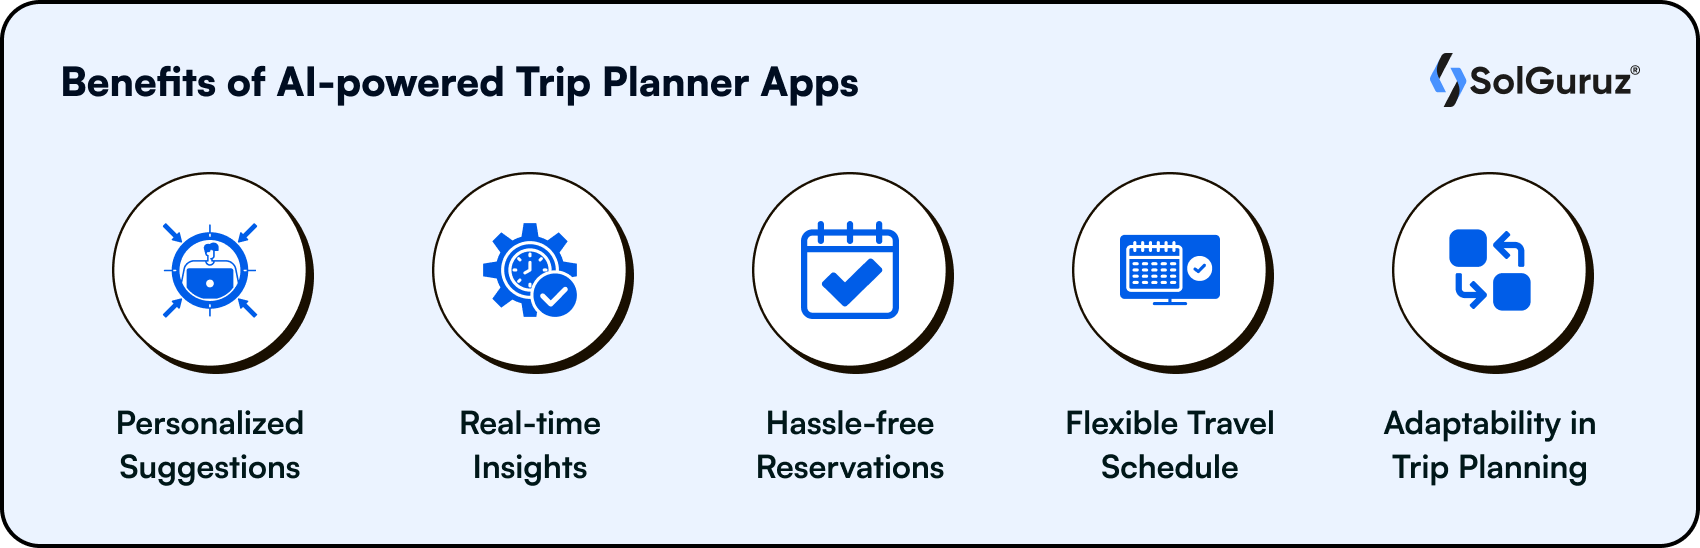 Benefits of AI-powered Trip Planner Apps